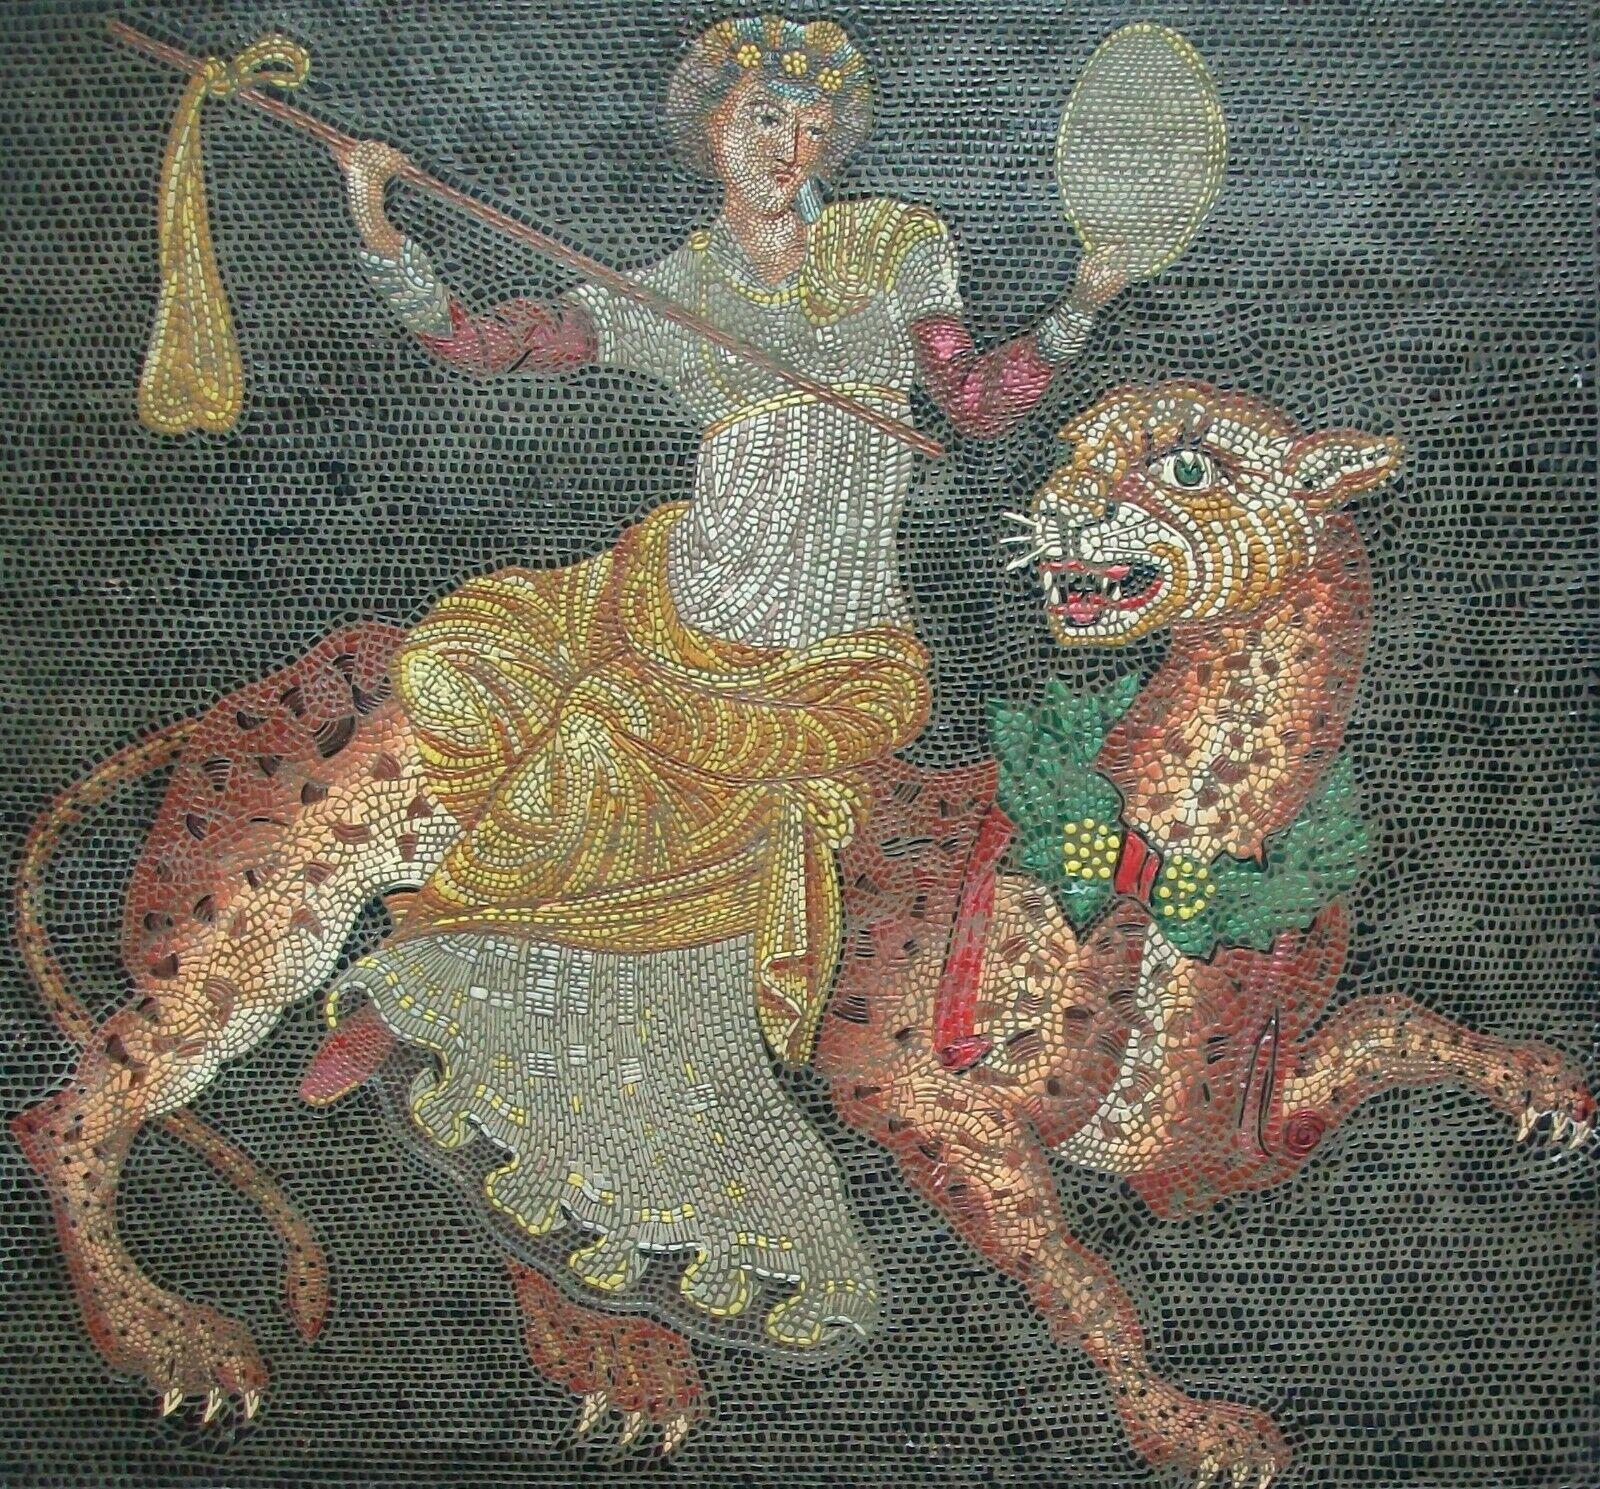 Dionysus Riding Panther (After the Antique) - Vintage Greco-Roman style - molded and painted Micro Mosaic style panel - contained in a wood frame with a walnut stain - lacquered paper dust cover to the back - signed and dated on the back